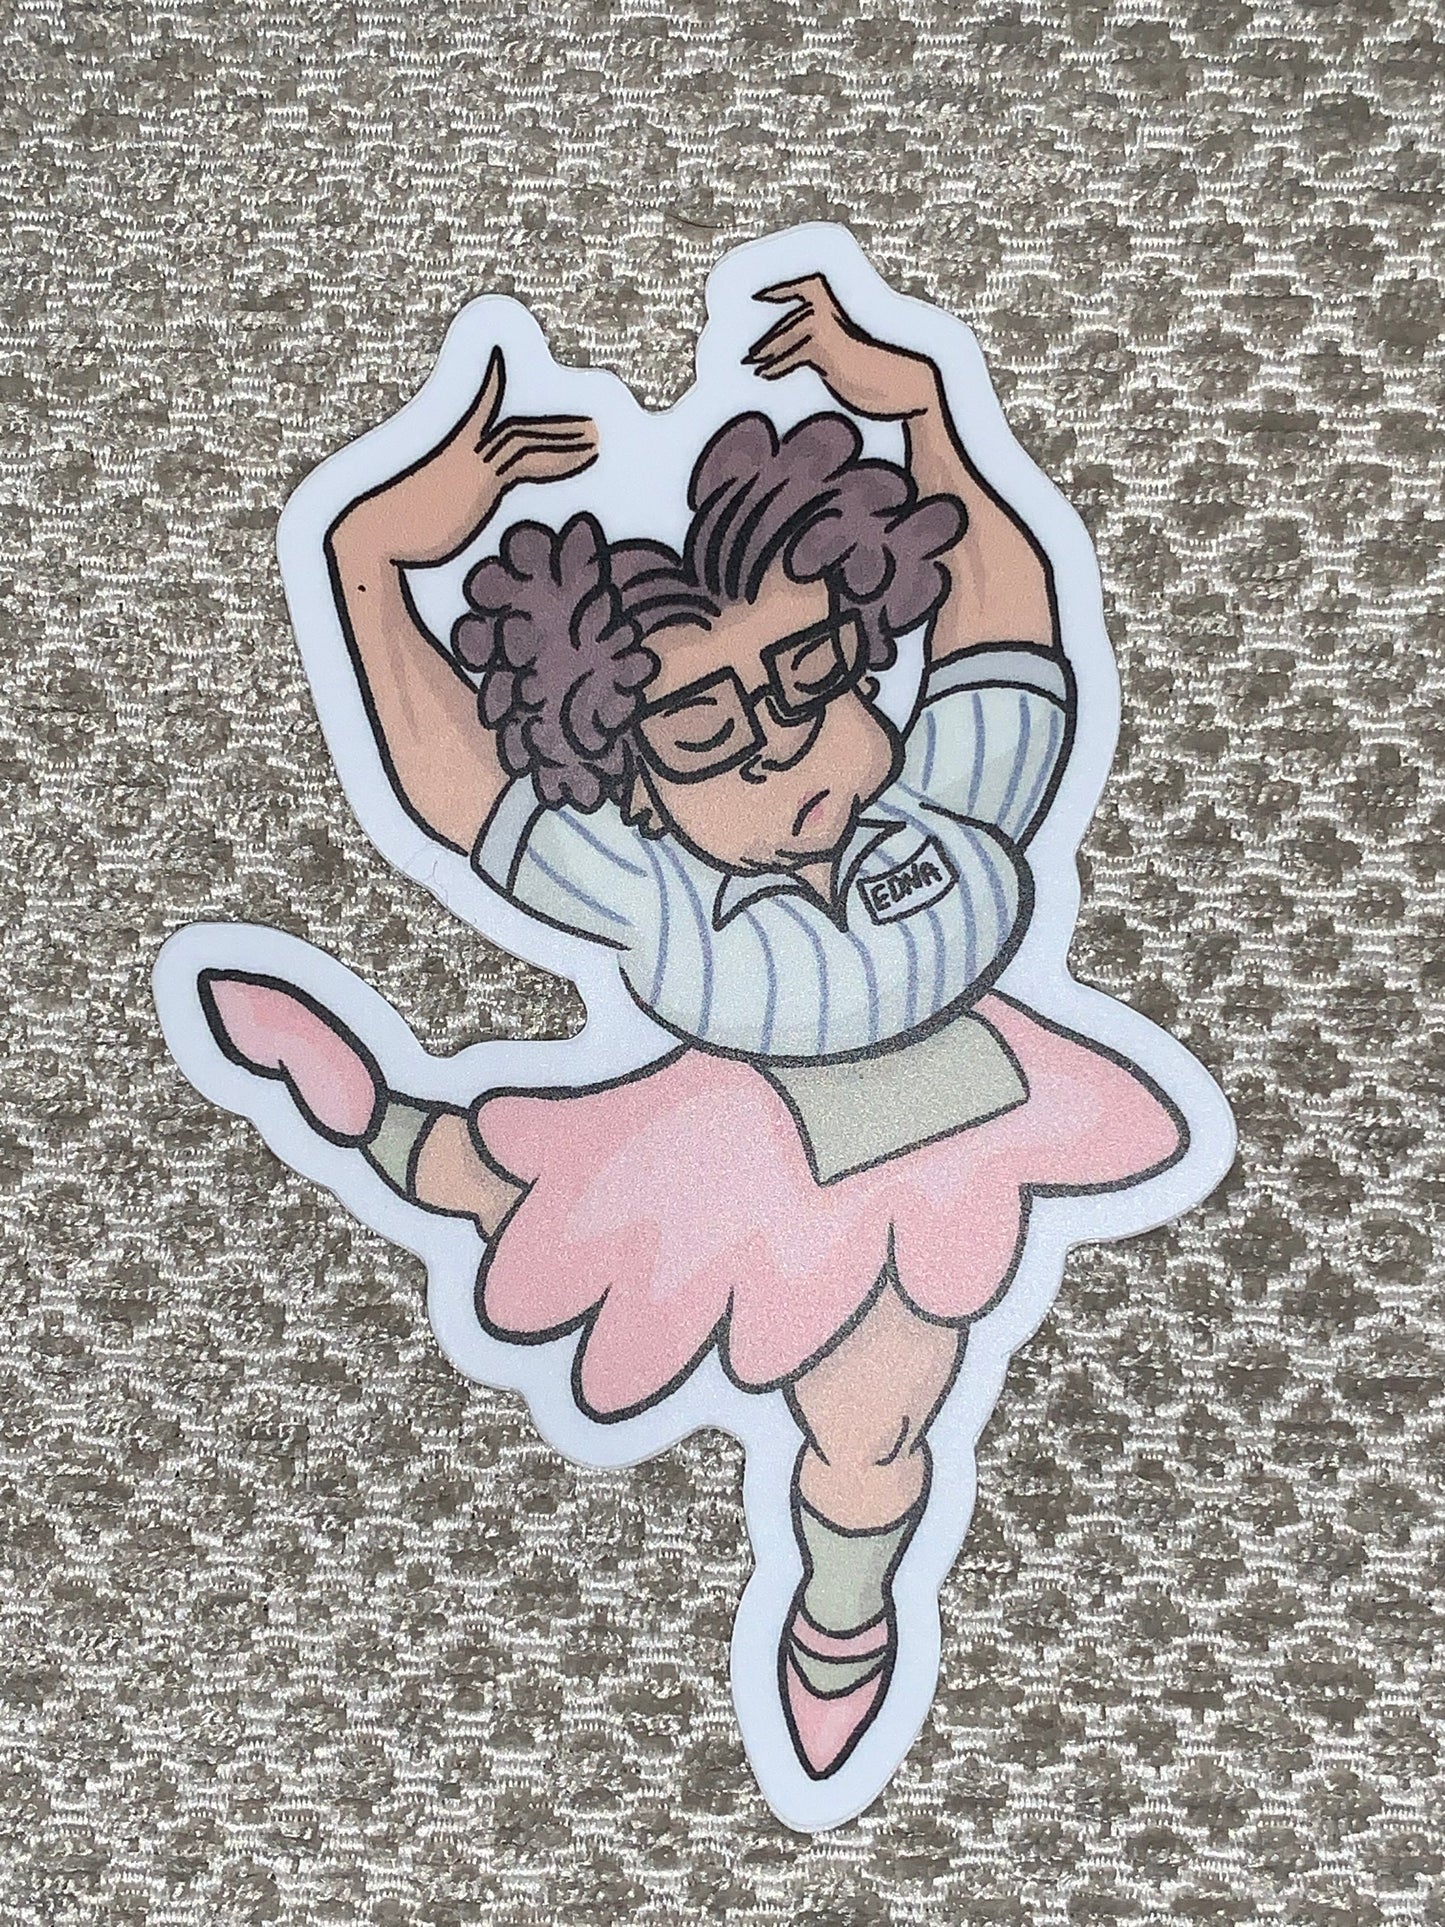 The Love of the Dance Edna Vinyl Sticker, Vinyl Decal, Sarcastic Cook, Gifts for Her, Laptop Stickers